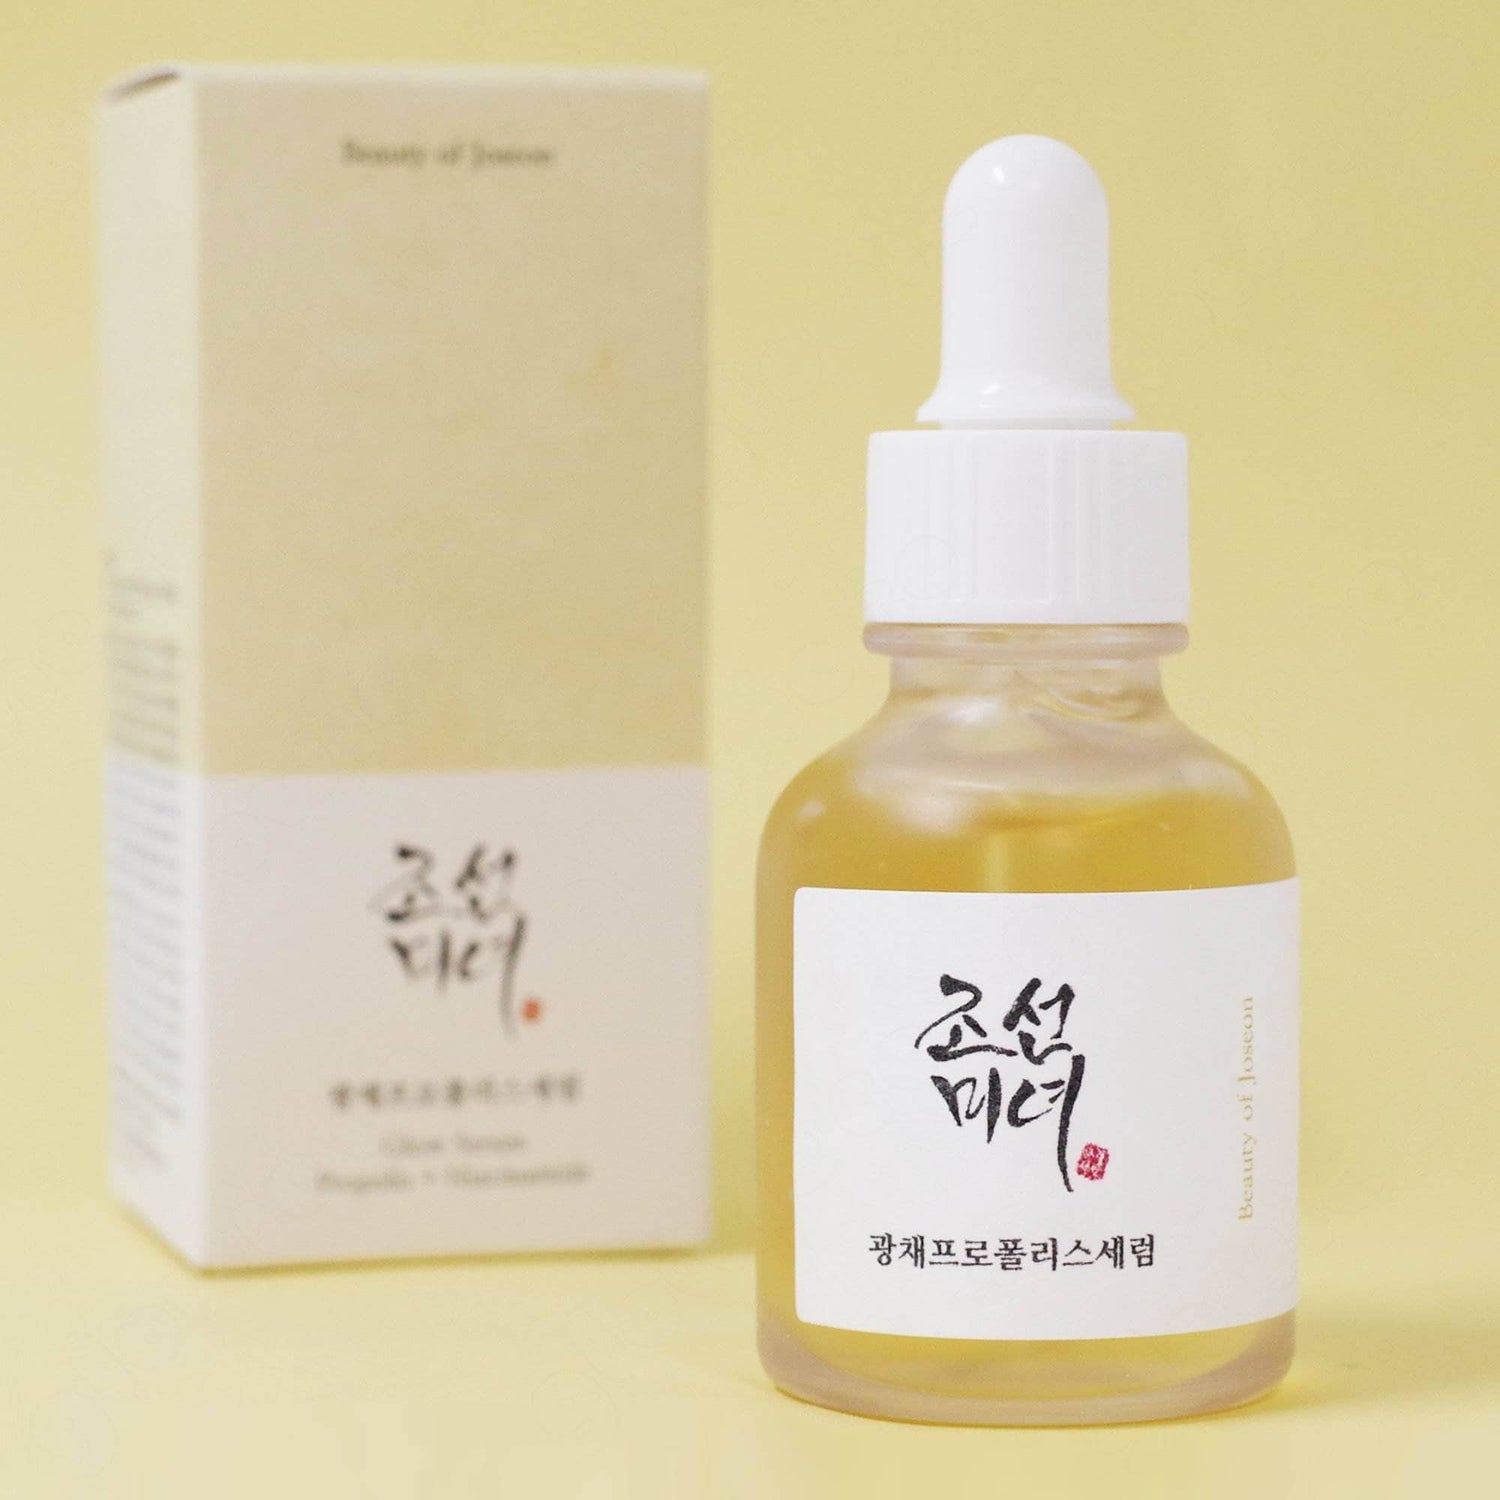 Restore a natural glow with this gentle brightening serum formulated with propolis and niacinamide to clarify the skin to retain its youthfulness!